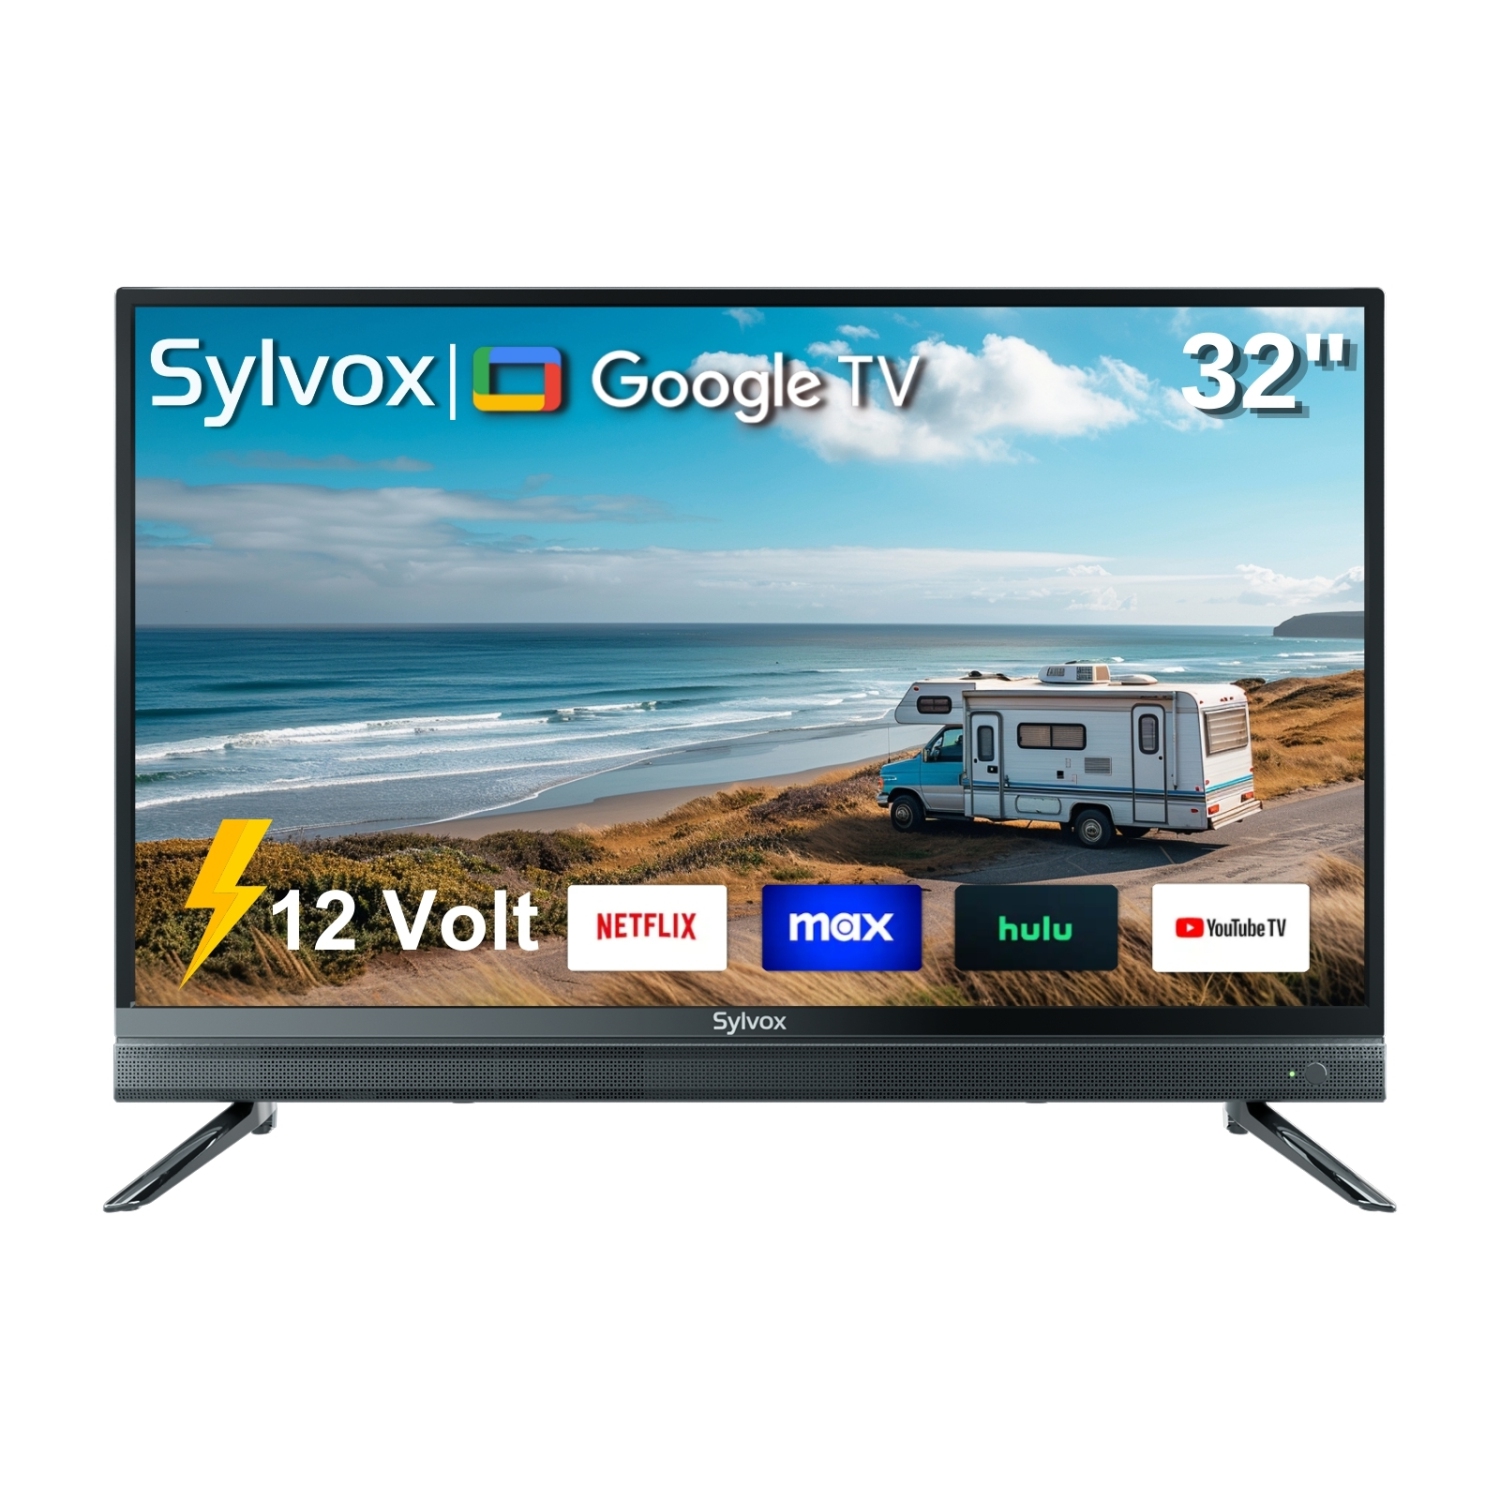 SYLVOX Smart 12Volt TV, 32" Newest Google TV Support Download APPs with Google Assistant, 1080P DC/AC Powered Television for RV Camper